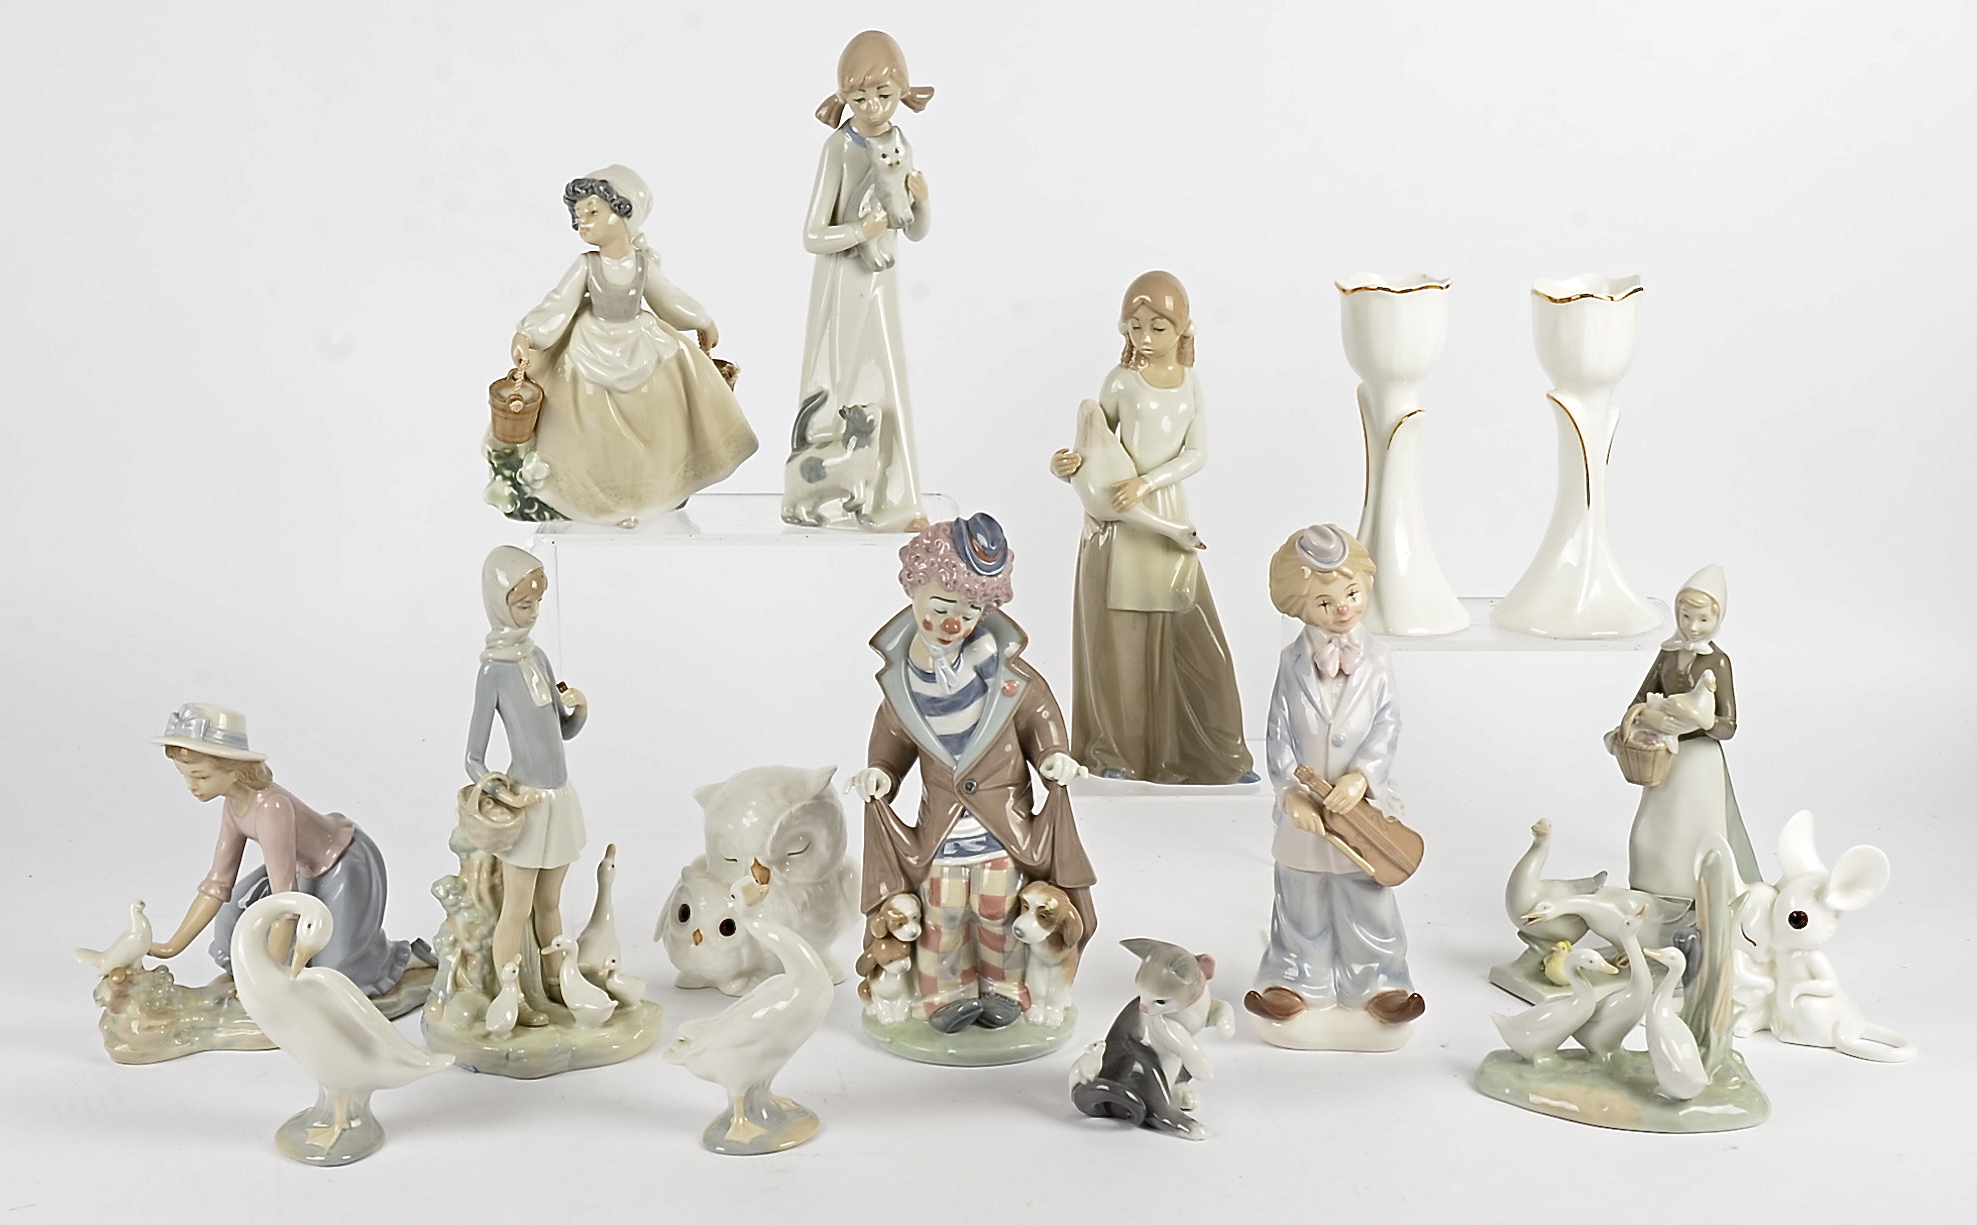 A small group of Lladro ceramics, including girls and geese, kittens and clowns and a few other